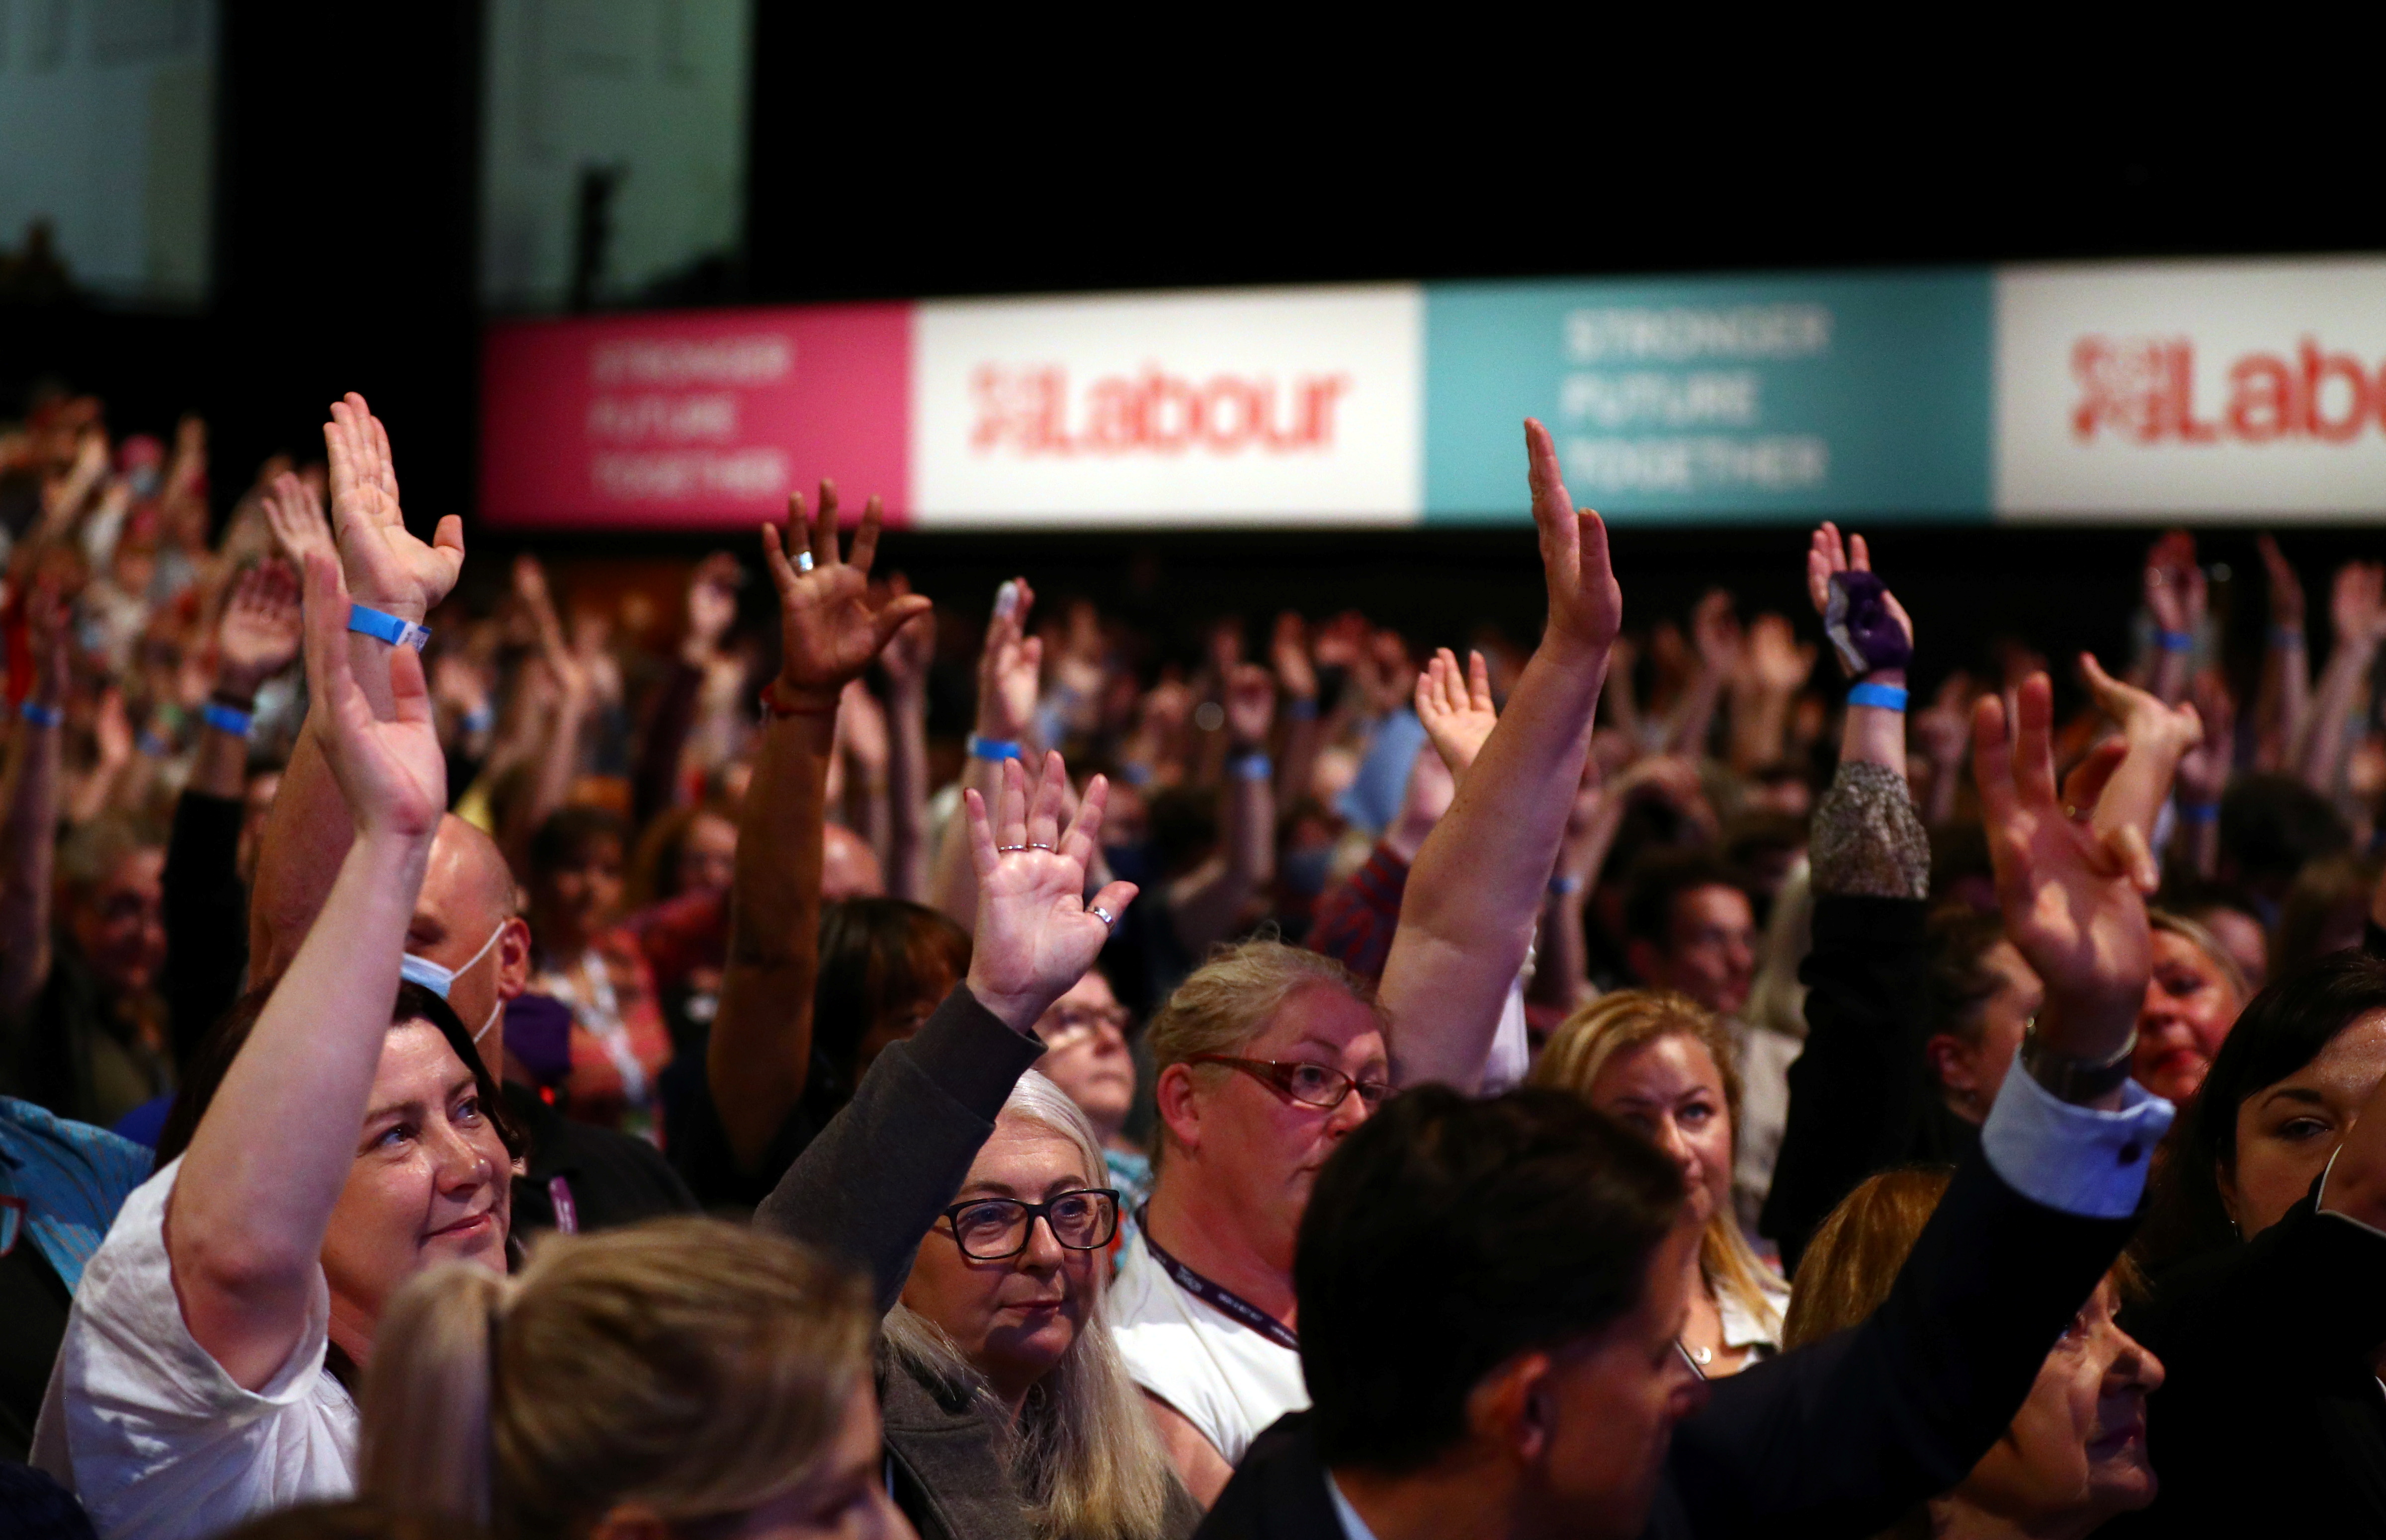 Audience voting at the UK Labour Party's conference in Brighton on 26 September 2021 (Reuters)